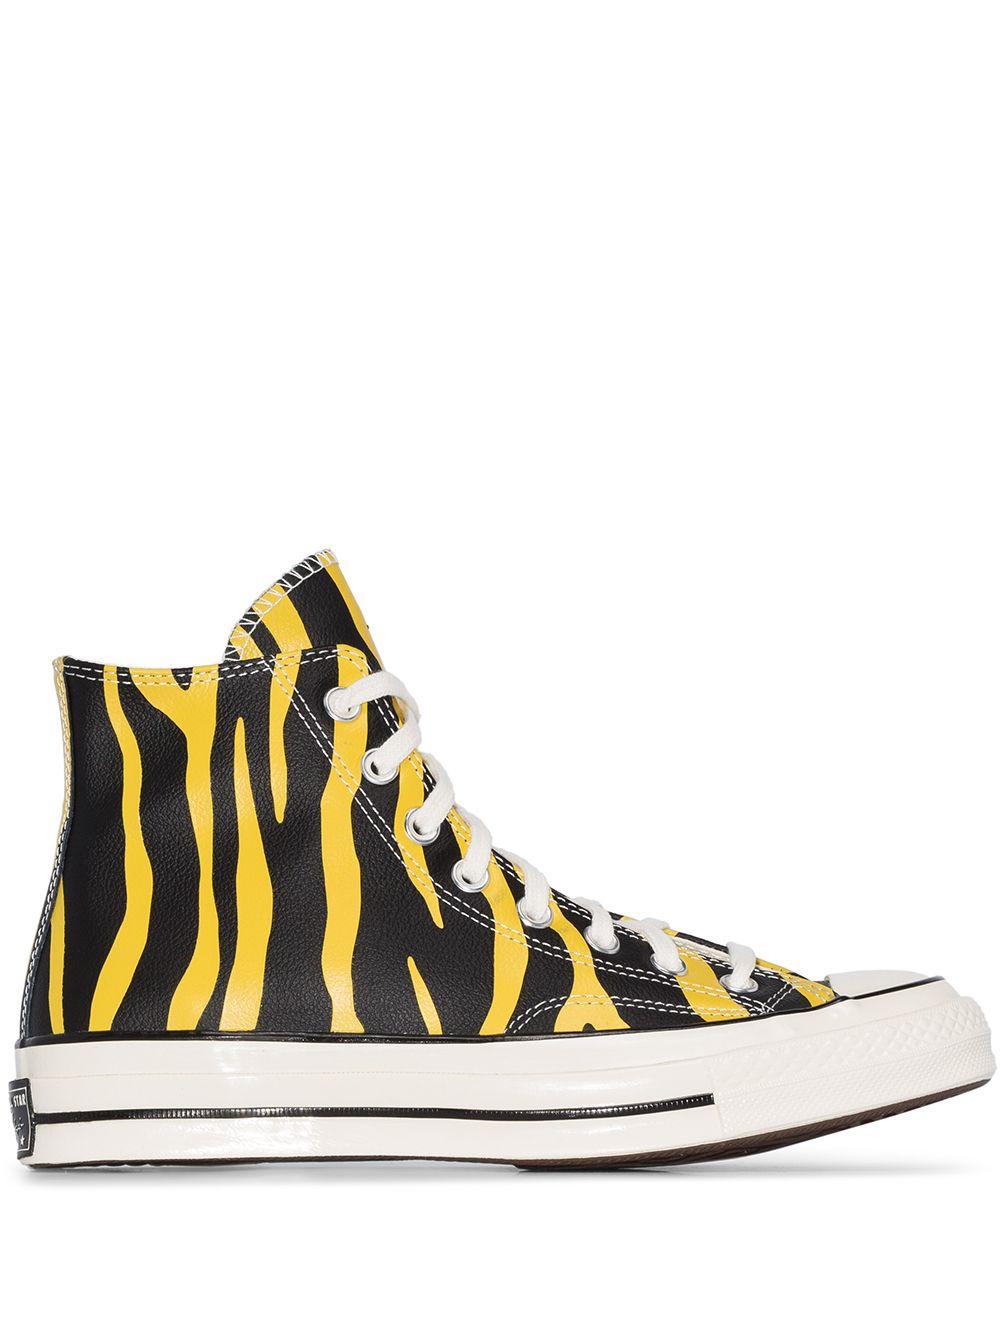 Converse Chuck 70 Tiger High Top Sneakers in Black | Lyst